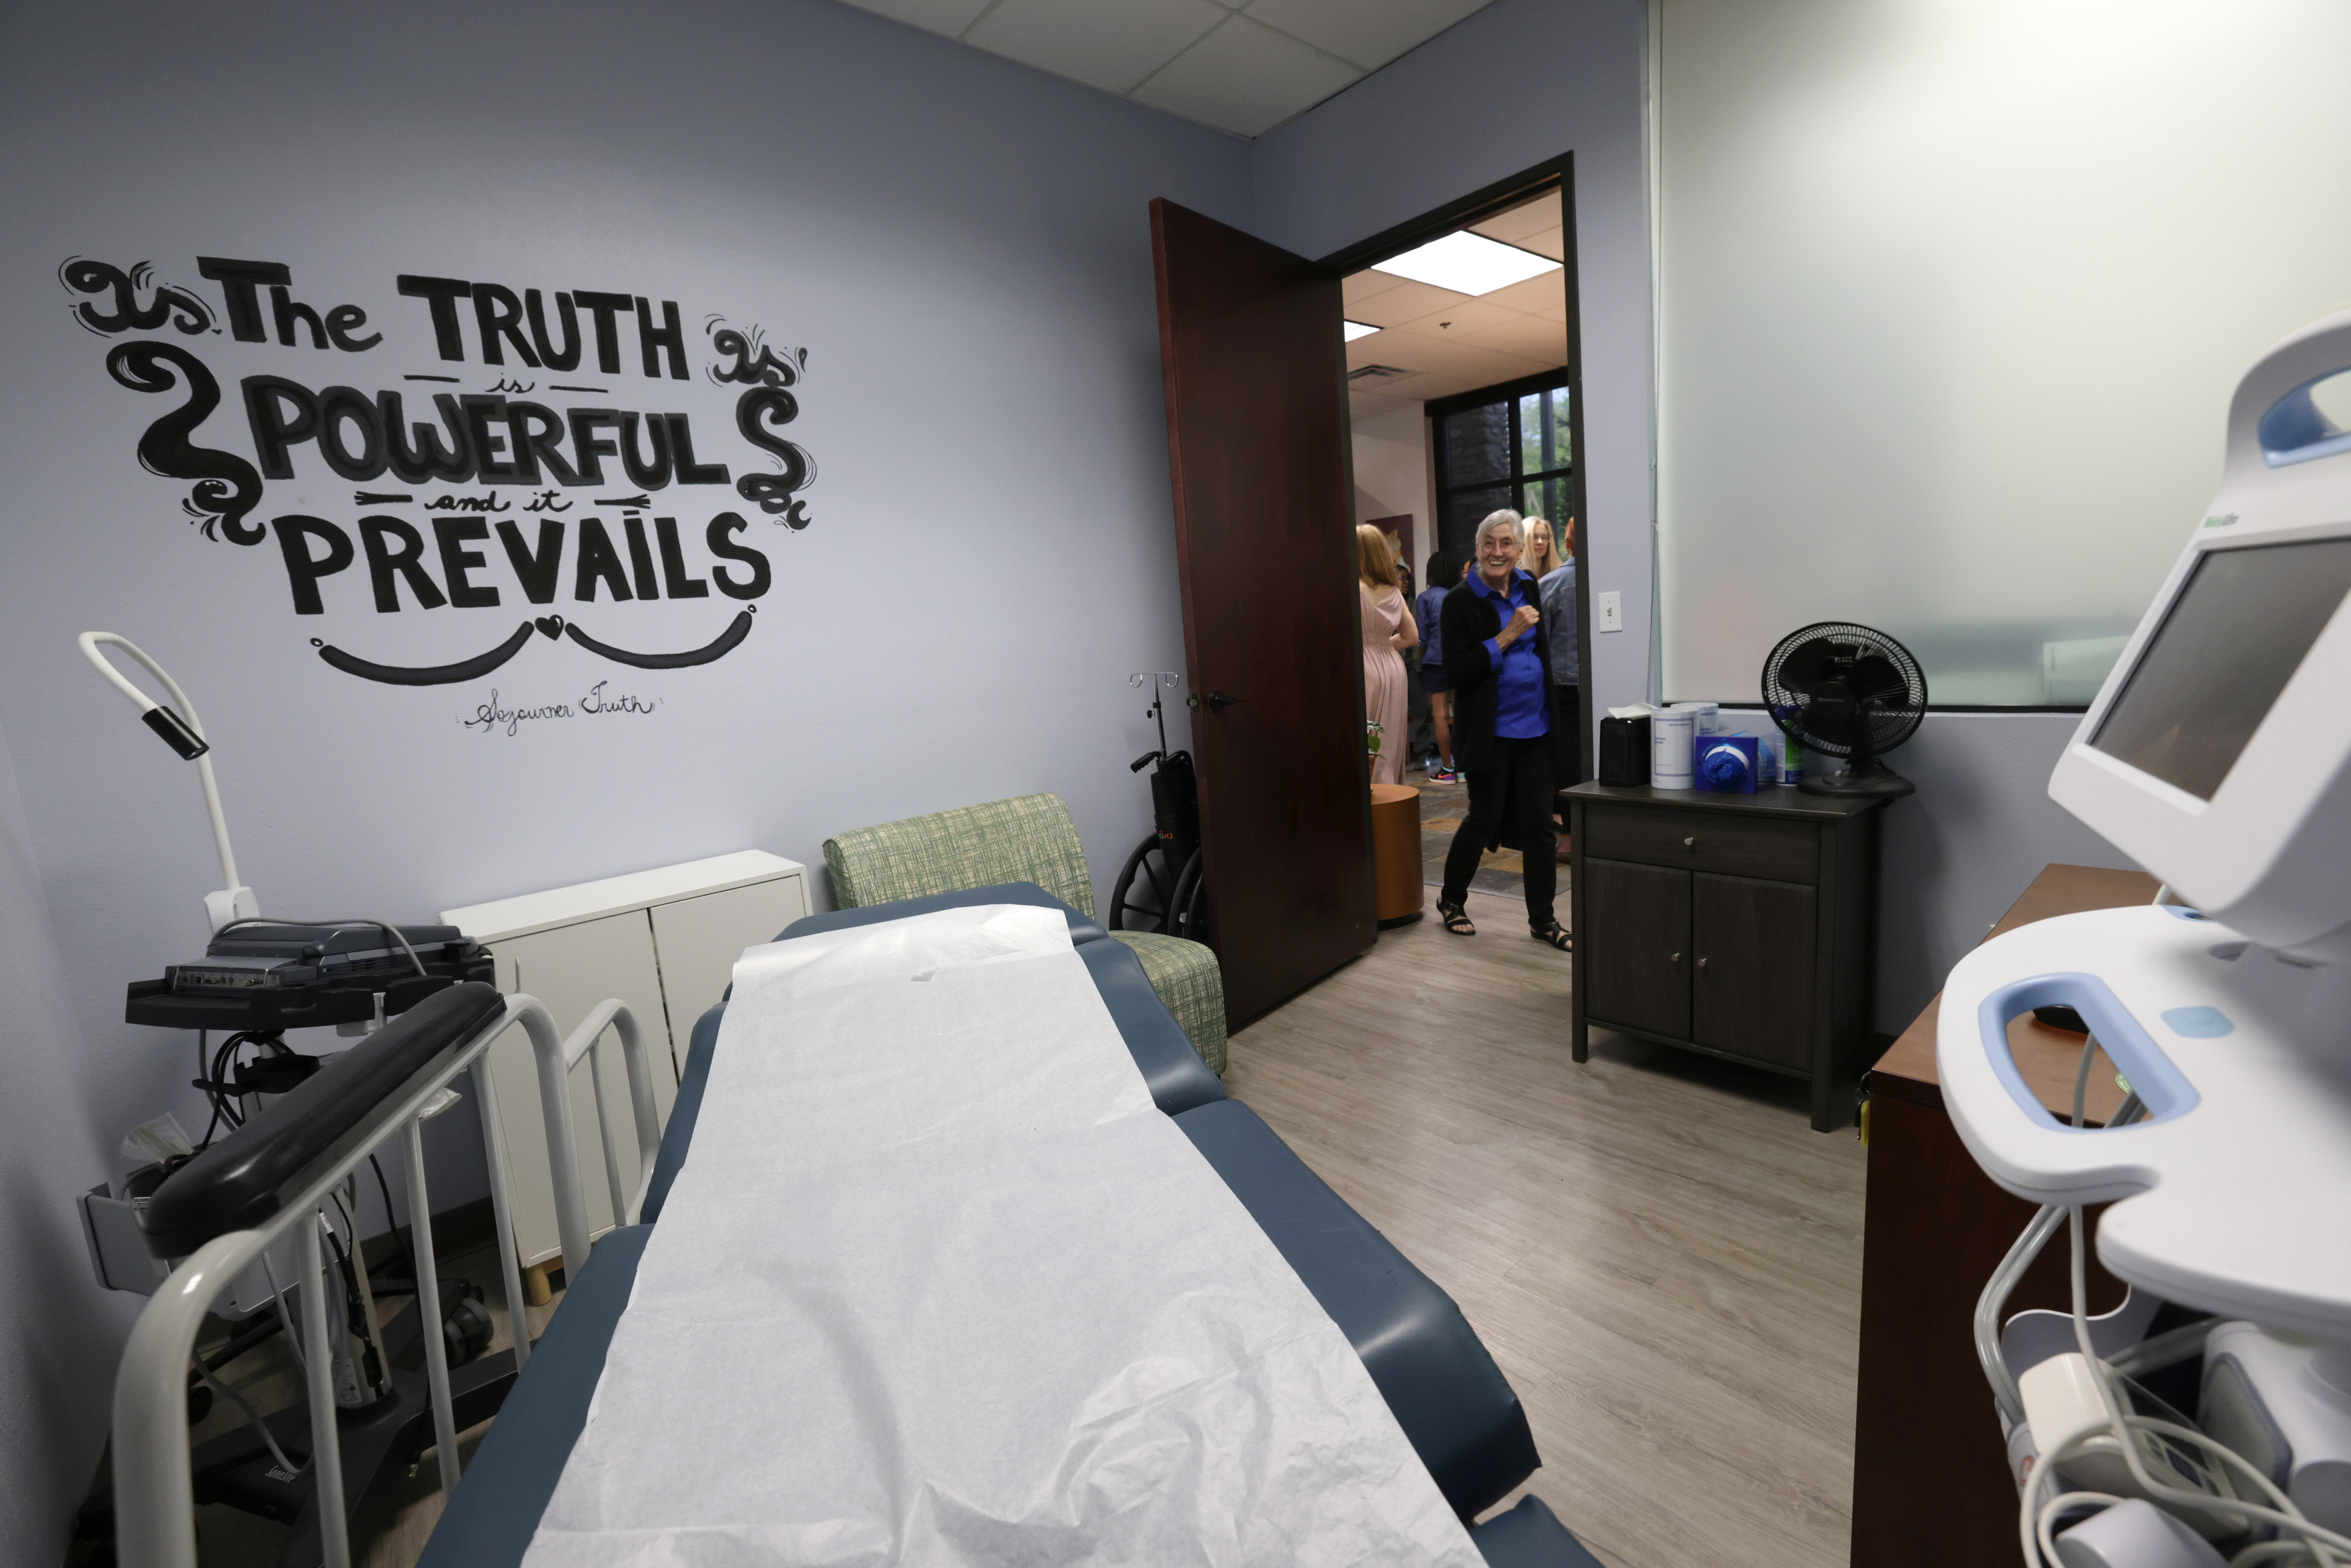 The sonogram room at the new First Unitarian Church of Dallas-sponsored pregnancy center in...